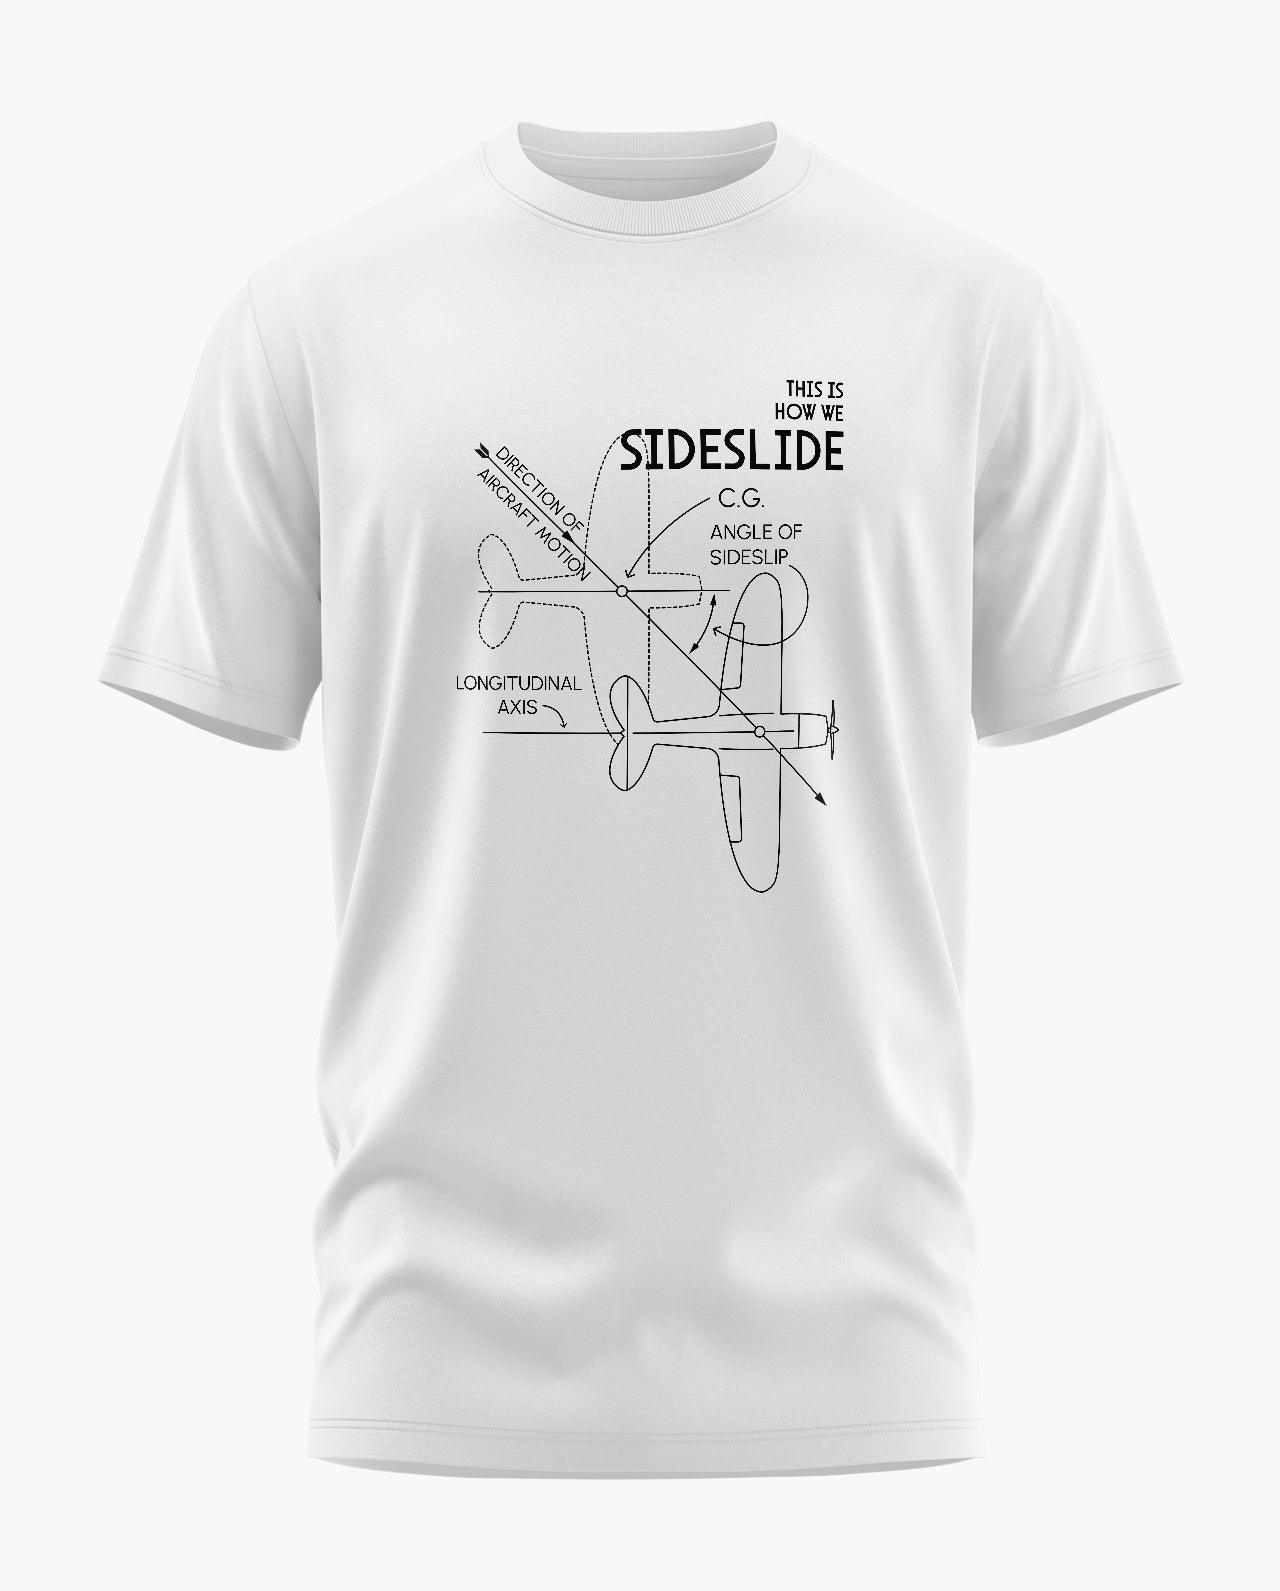 This is How We Sideslide T-Shirt - Aero Armour